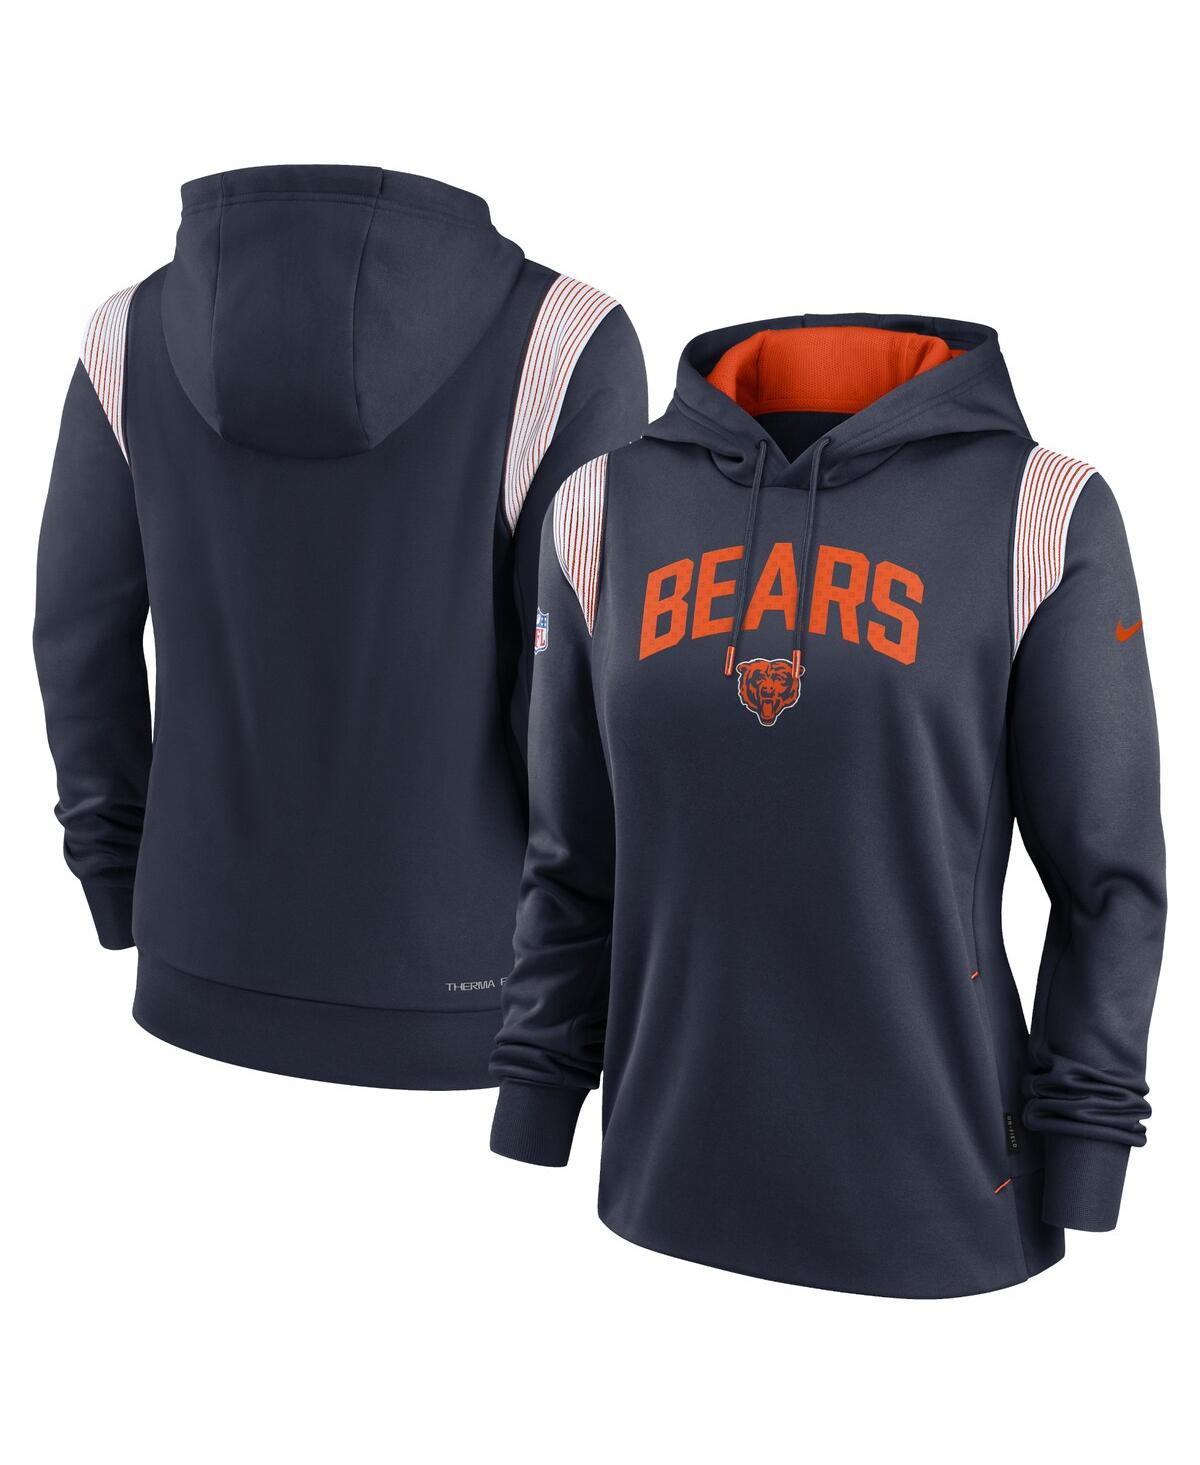 Shop Nike Women's  Navy Chicago Bears Sideline Stack Performance Pullover Hoodie